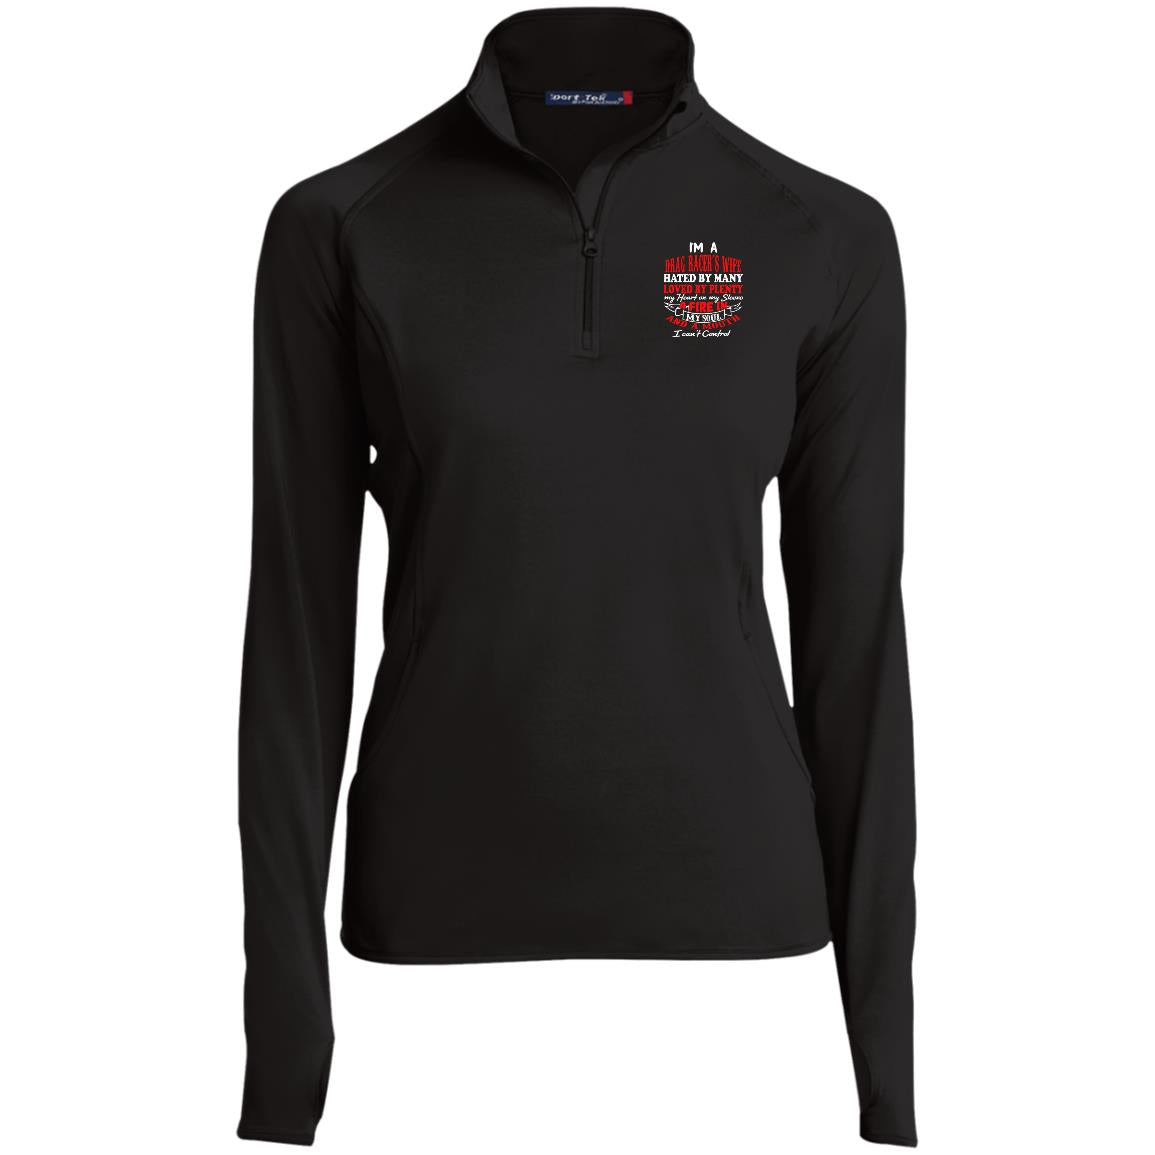 I'm A Drag Racer's Wife Hated By Many Loved By Plenty Ladies' 1/2 Zip Performance Pullover